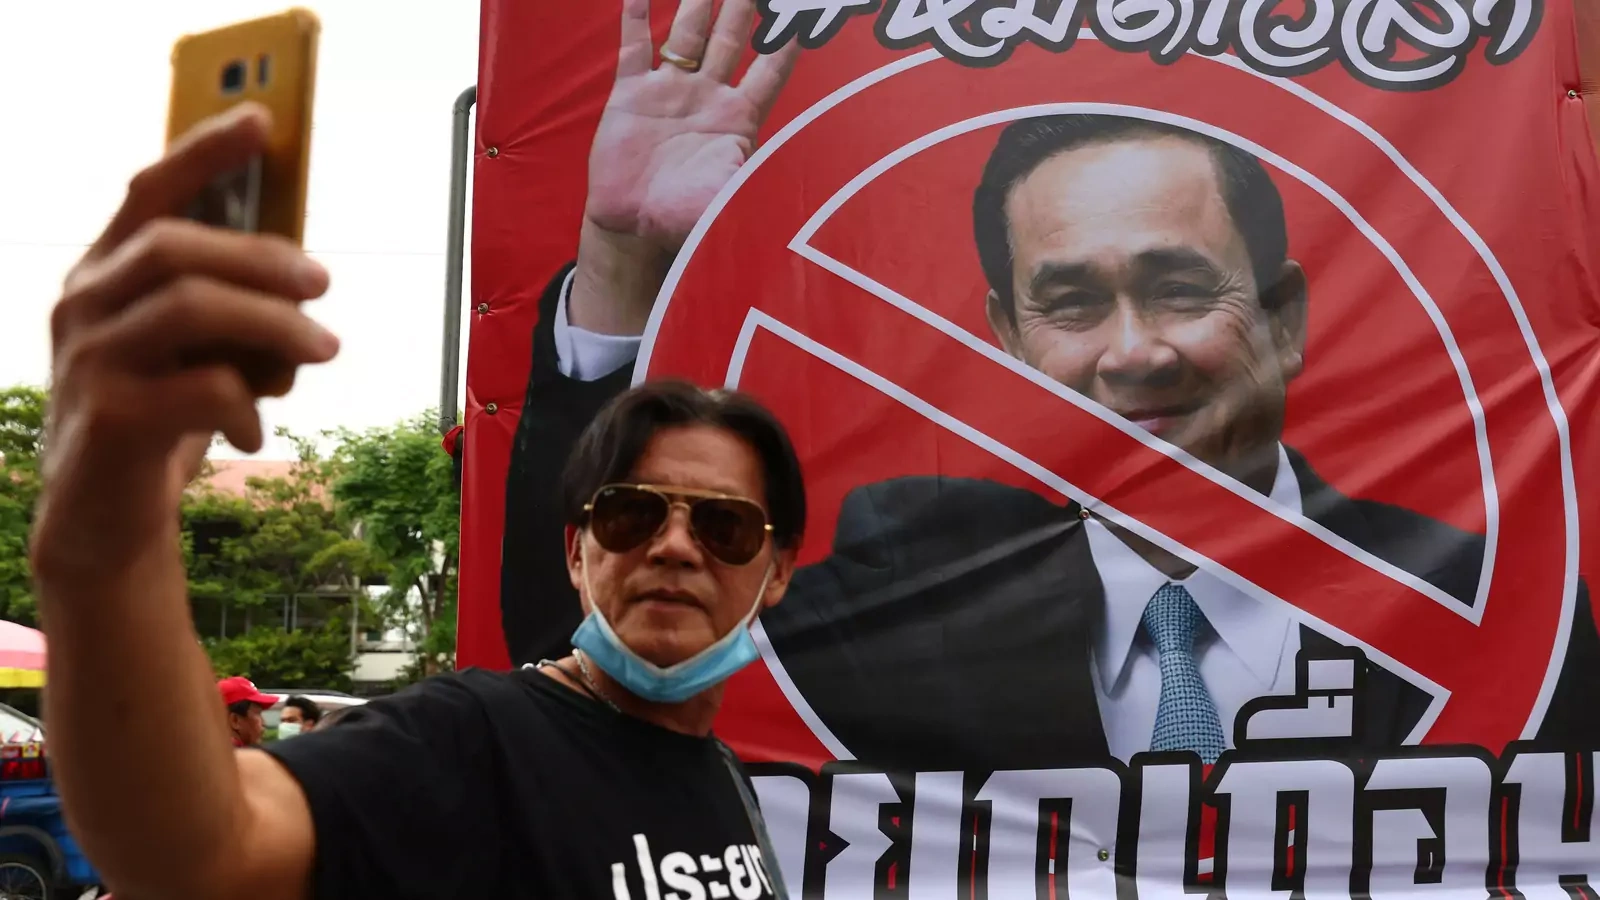 A protester takes a picture next to a picture of Thailand's Prime Minister Prayuth Chan-ocha outside the Government House, as the Constitutional Court suspended Prime Minister Prayuth Chan-ocha from official duties, in Bangkok, Thailand, August 24, 2022. 